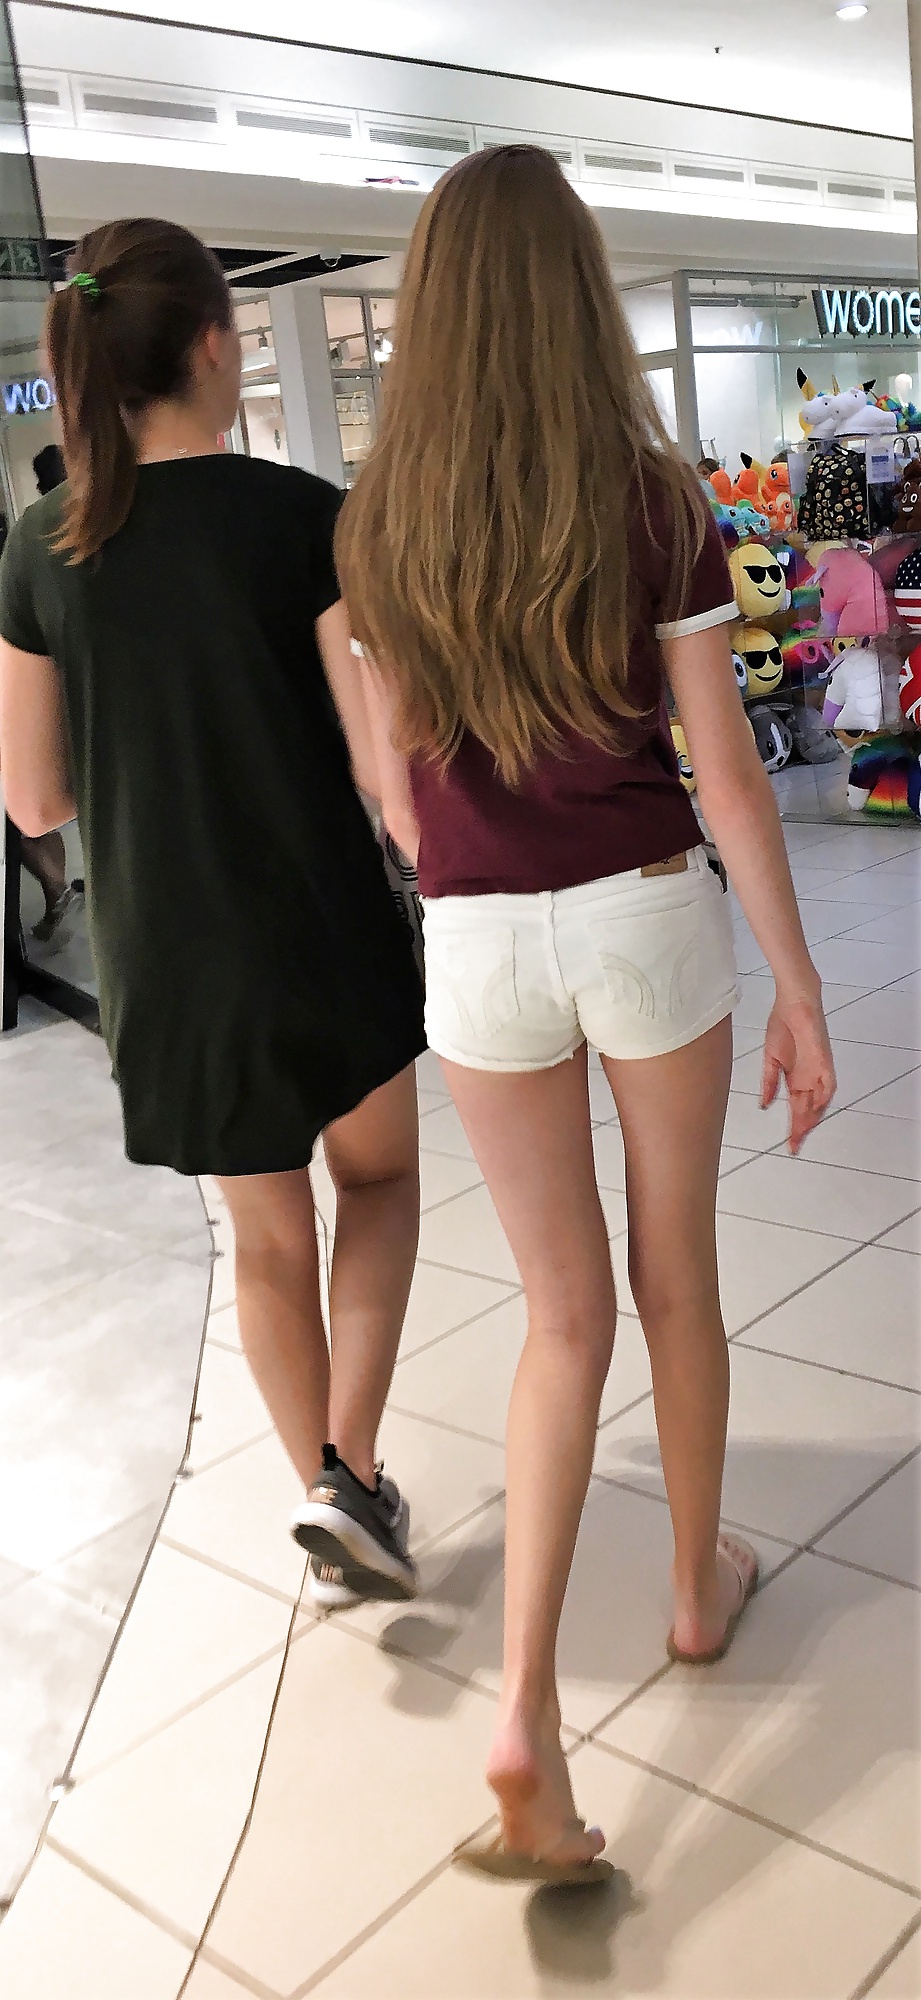 18yr extremely tight and sexy blonde mall teen in shorts (3/8)